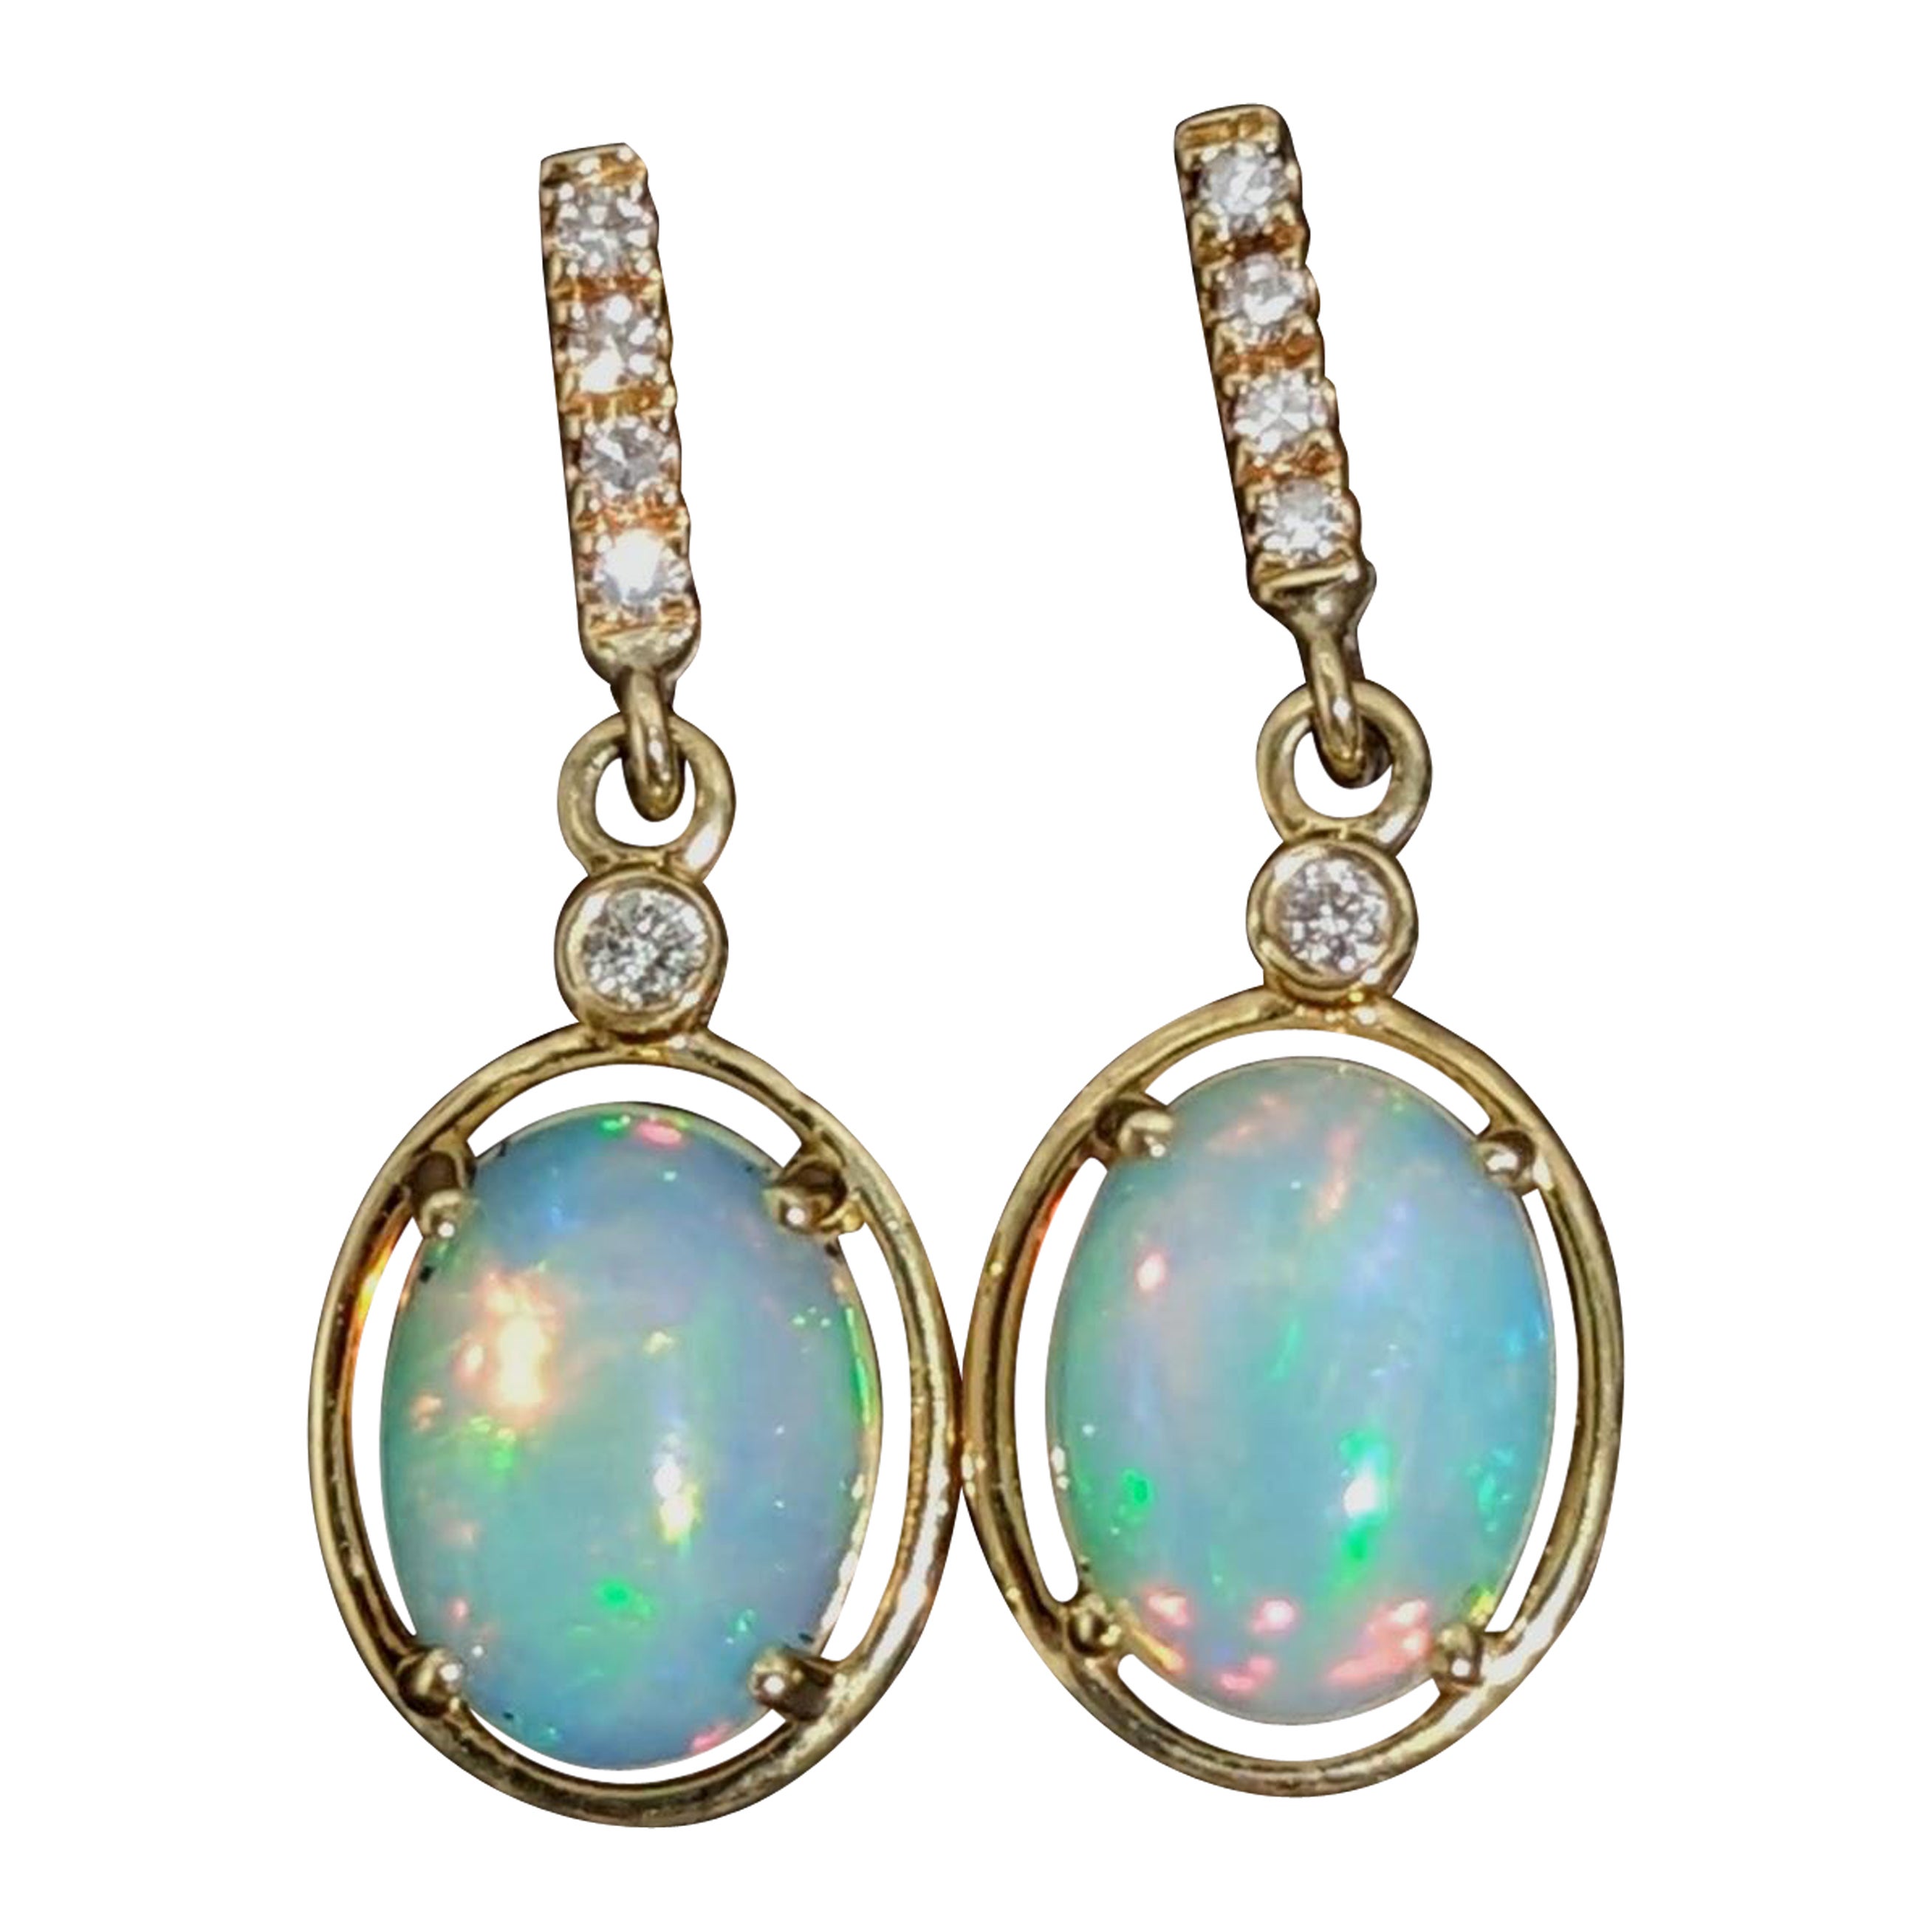 1.63ct Dangly Opal Drops w Diamond Accents in 14k Solid Yellow Gold Oval 10x8mm